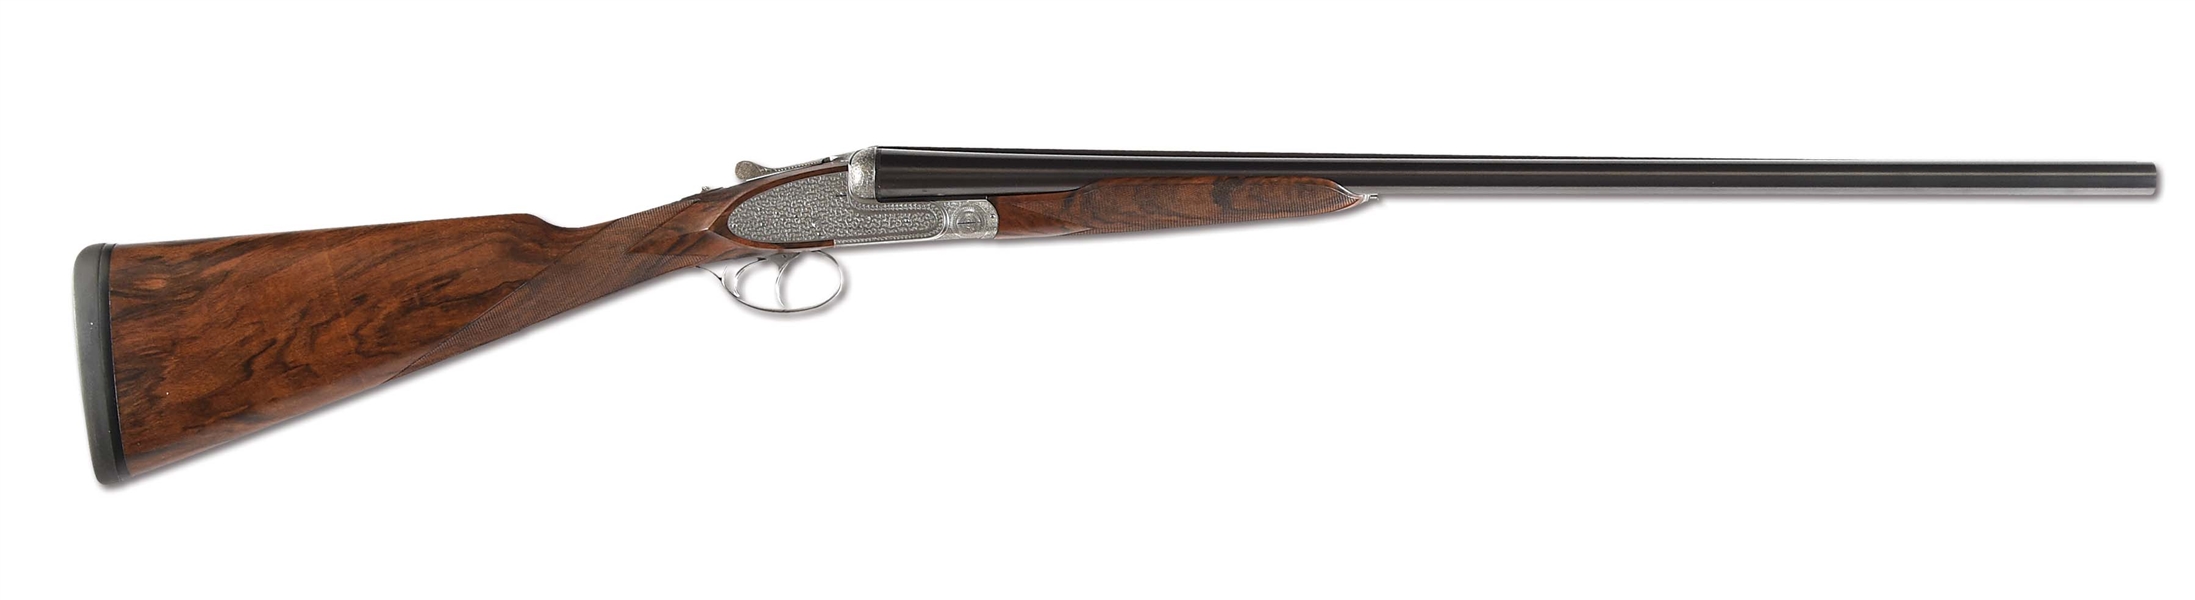 (M) SUPERB AND UNIQUE PIOTTI KING EXTRA 12 BORE SIDELOCK EJECTOR GAME GUN - THE 2ND GUN IN THE FAMED "SET FOR LIFE"..  